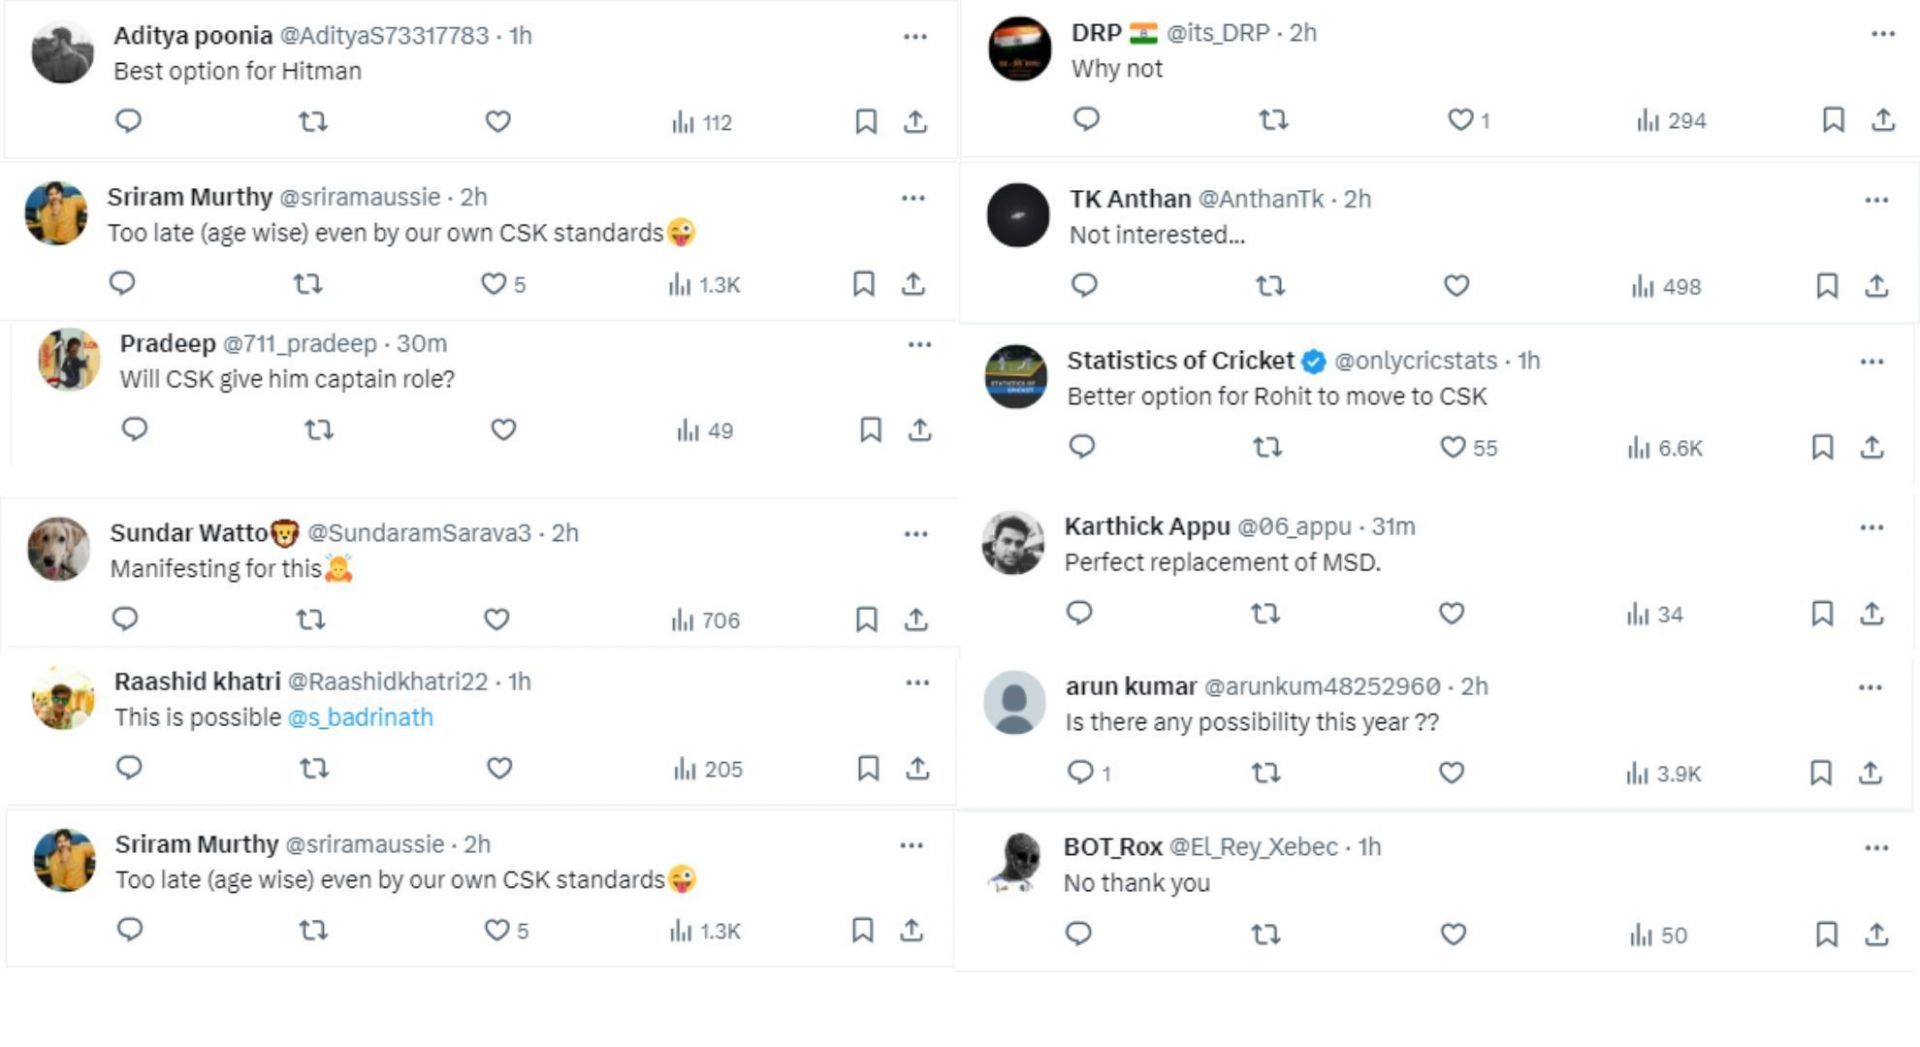 X users reacted to Rohit Sharma&#039;s picture in a CSK jersey.